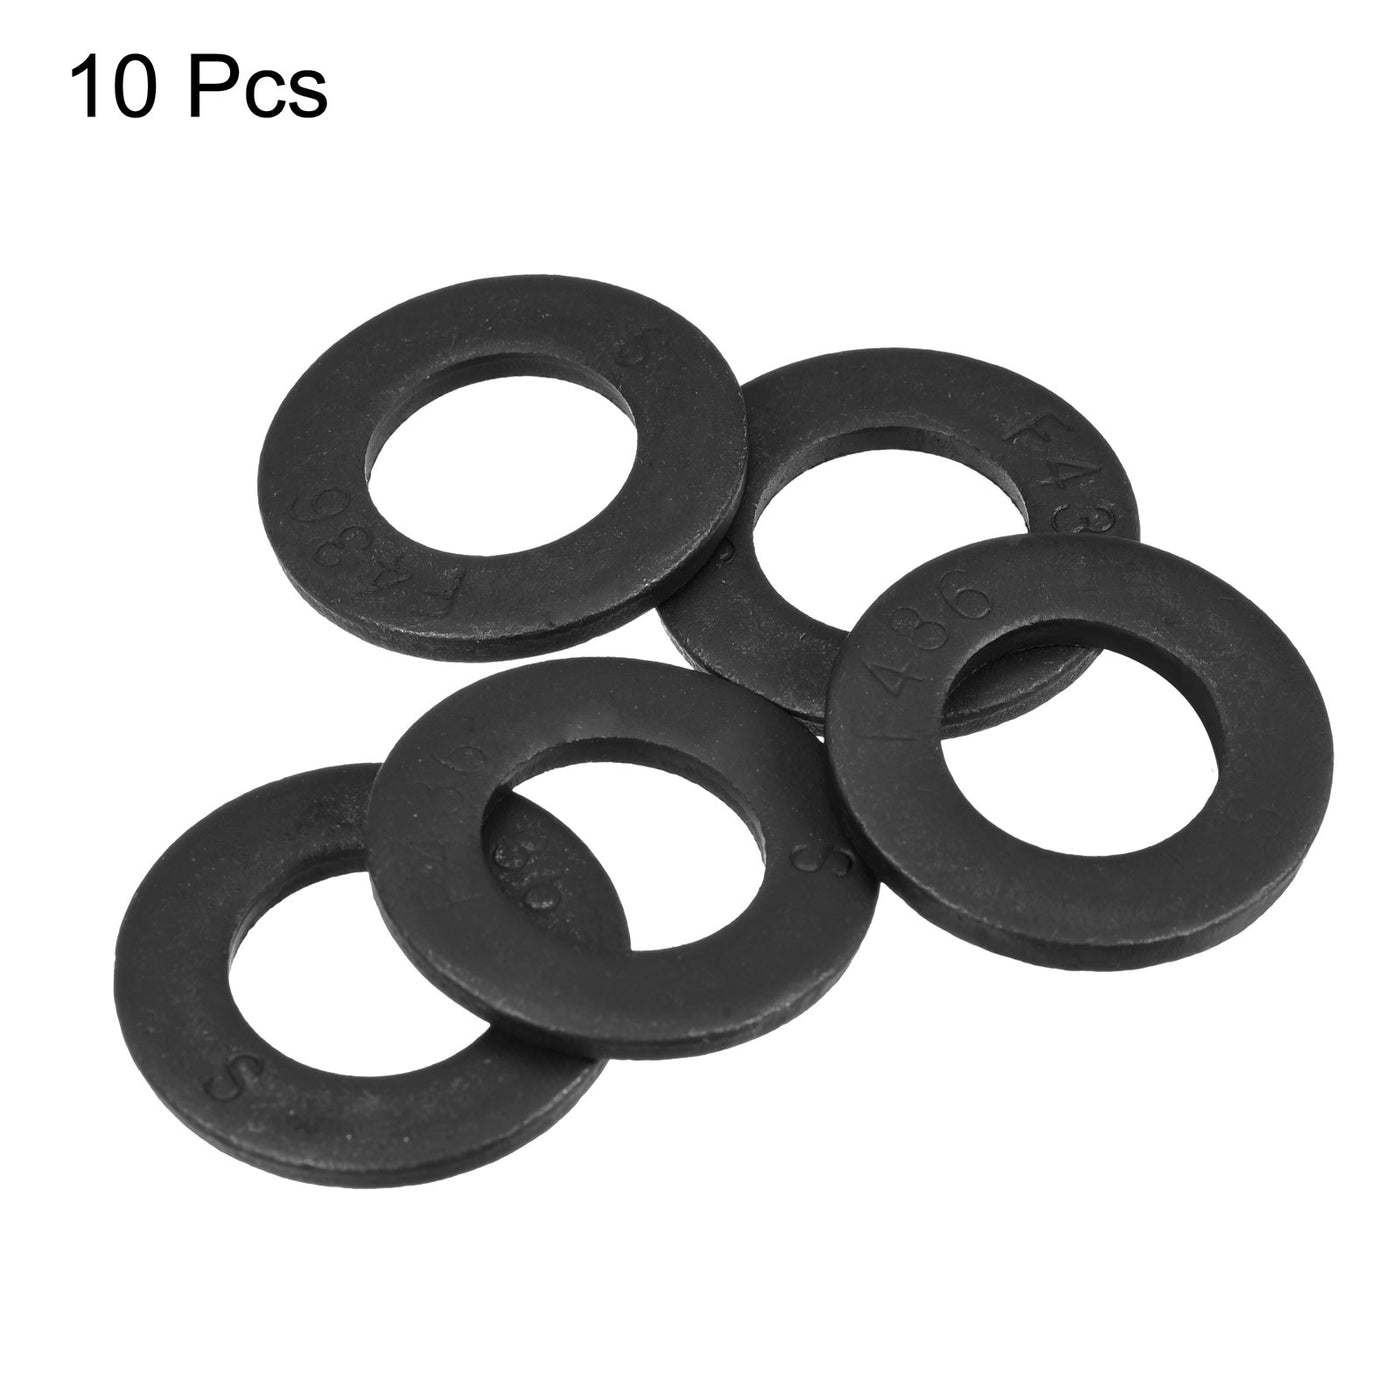 uxcell Uxcell 5/8-Inch Flat Washer, Alloy Steel Black Oxide Finish Pack of 10